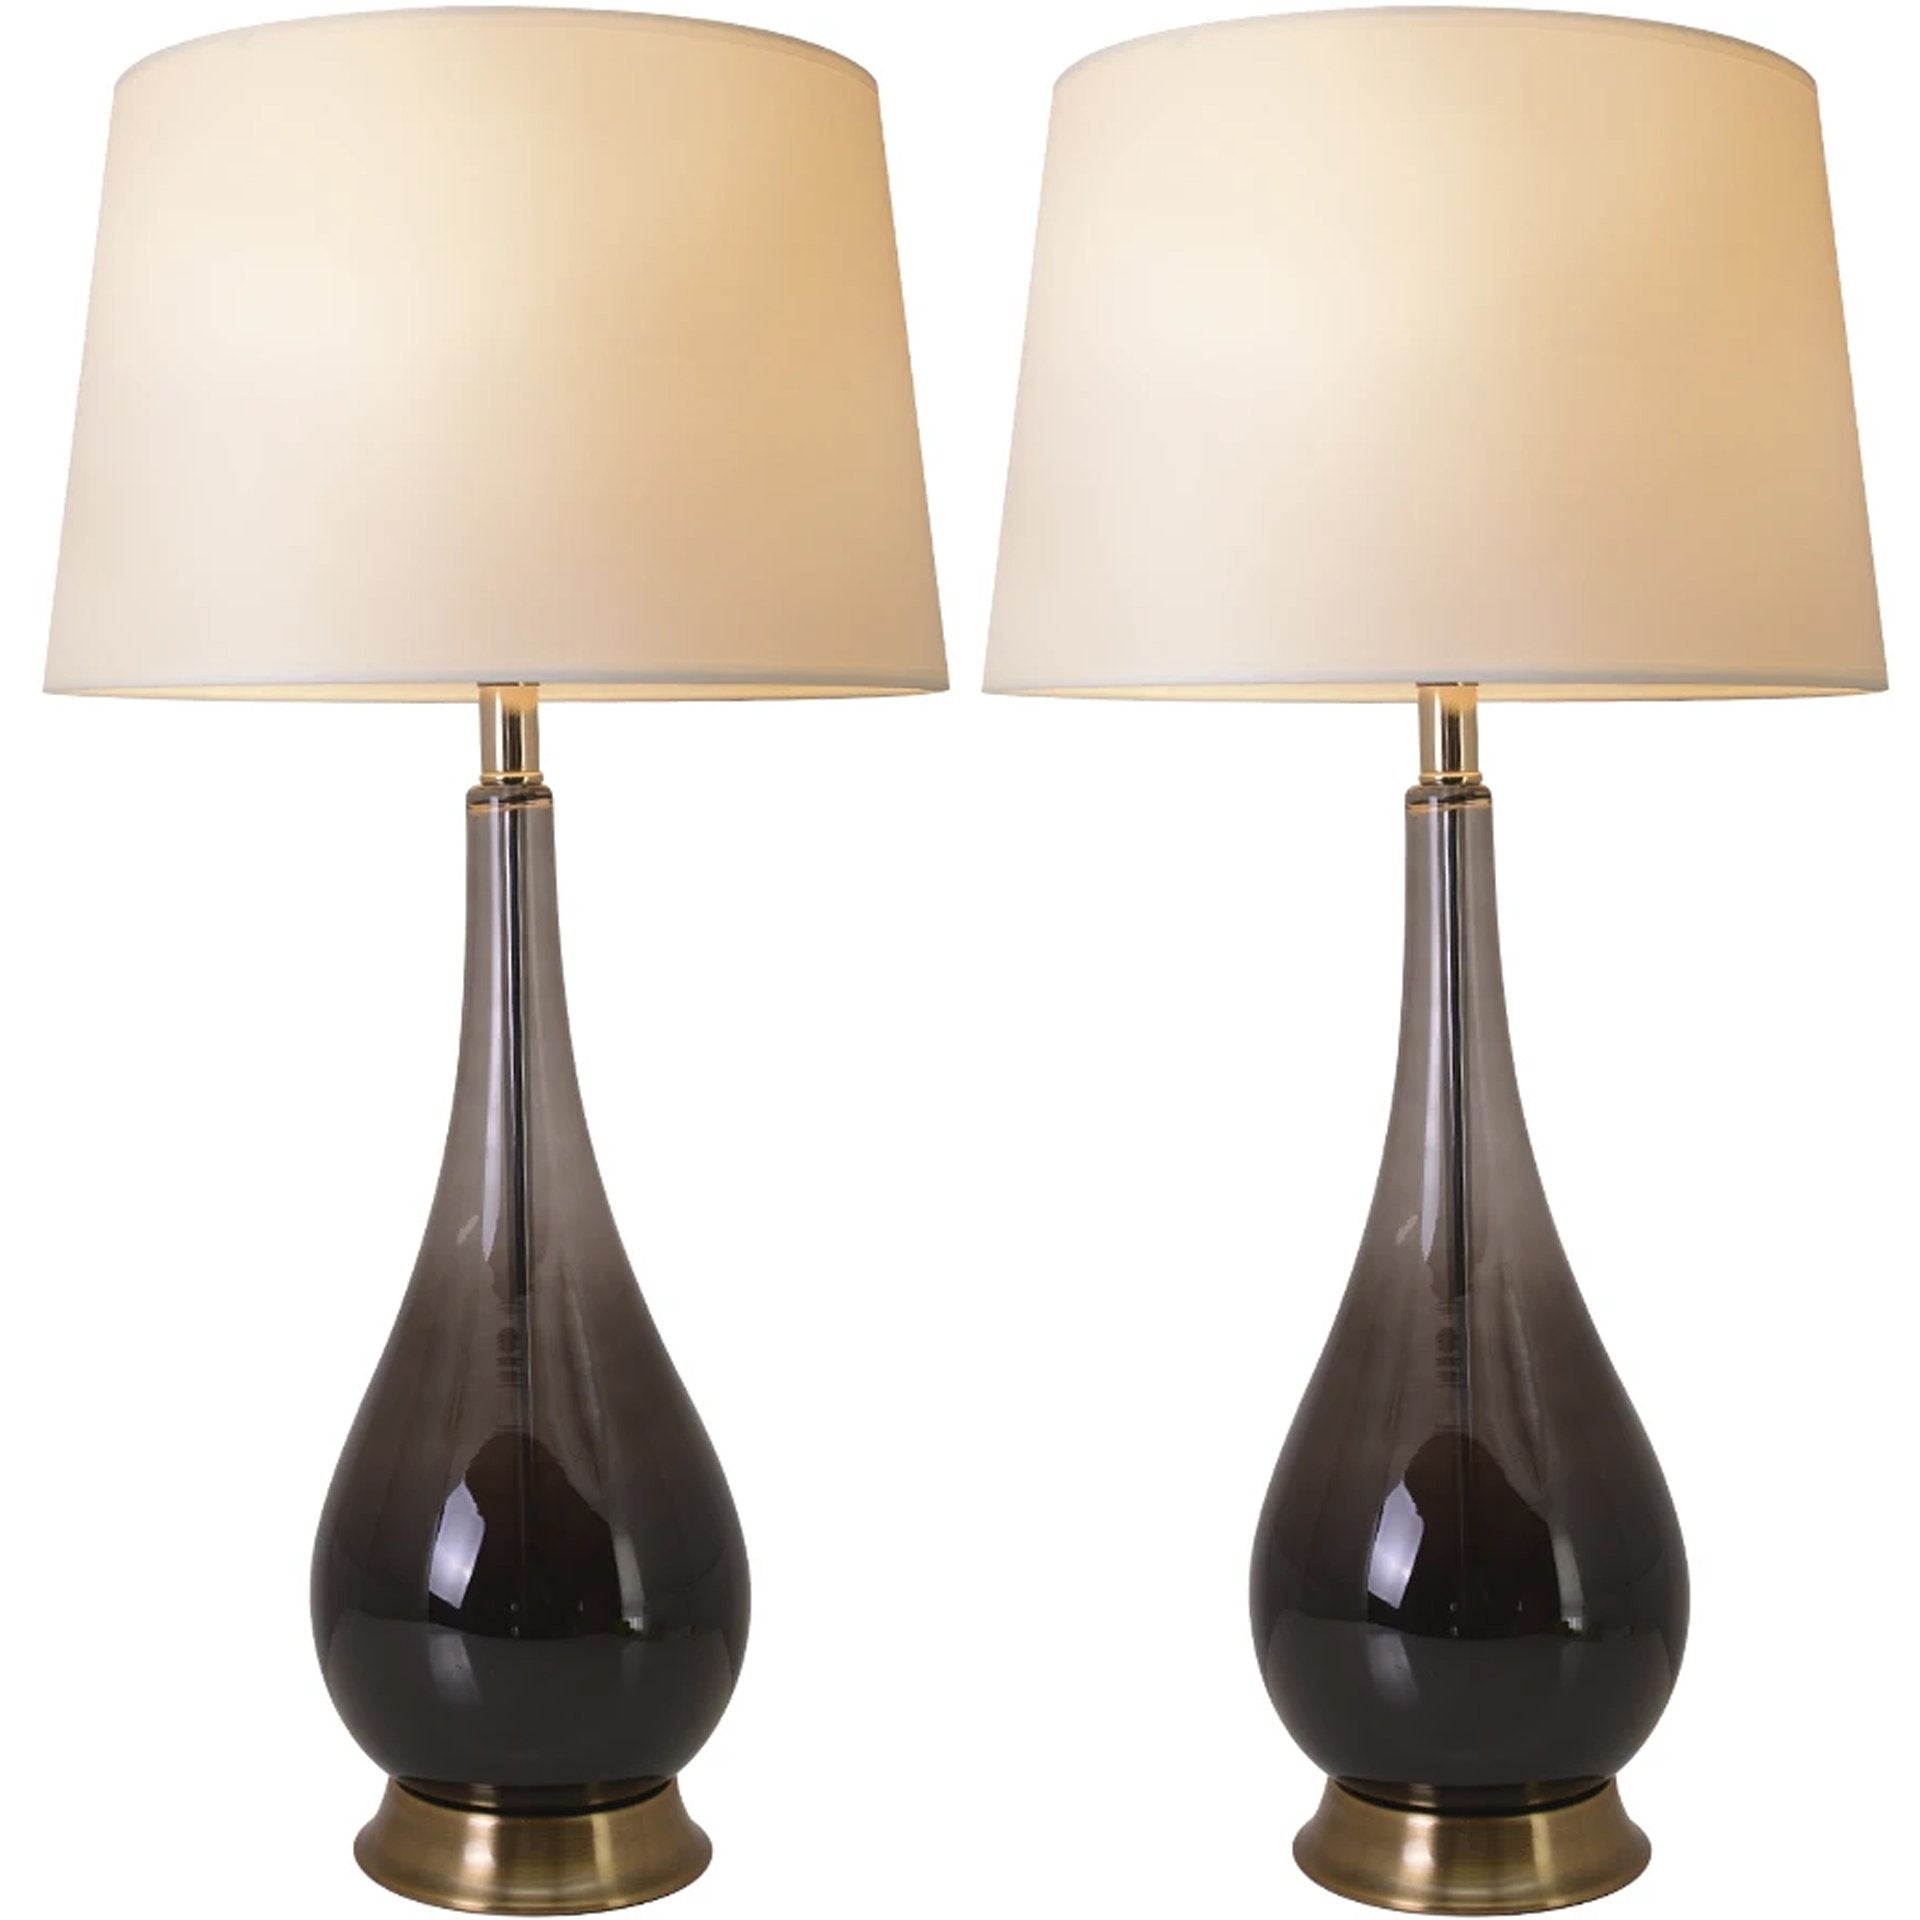 Tulip Big Translucent Ombre Glass Table Lamp 30&quot; - Smoke Gray Ombre/Creme (Set of 2) 